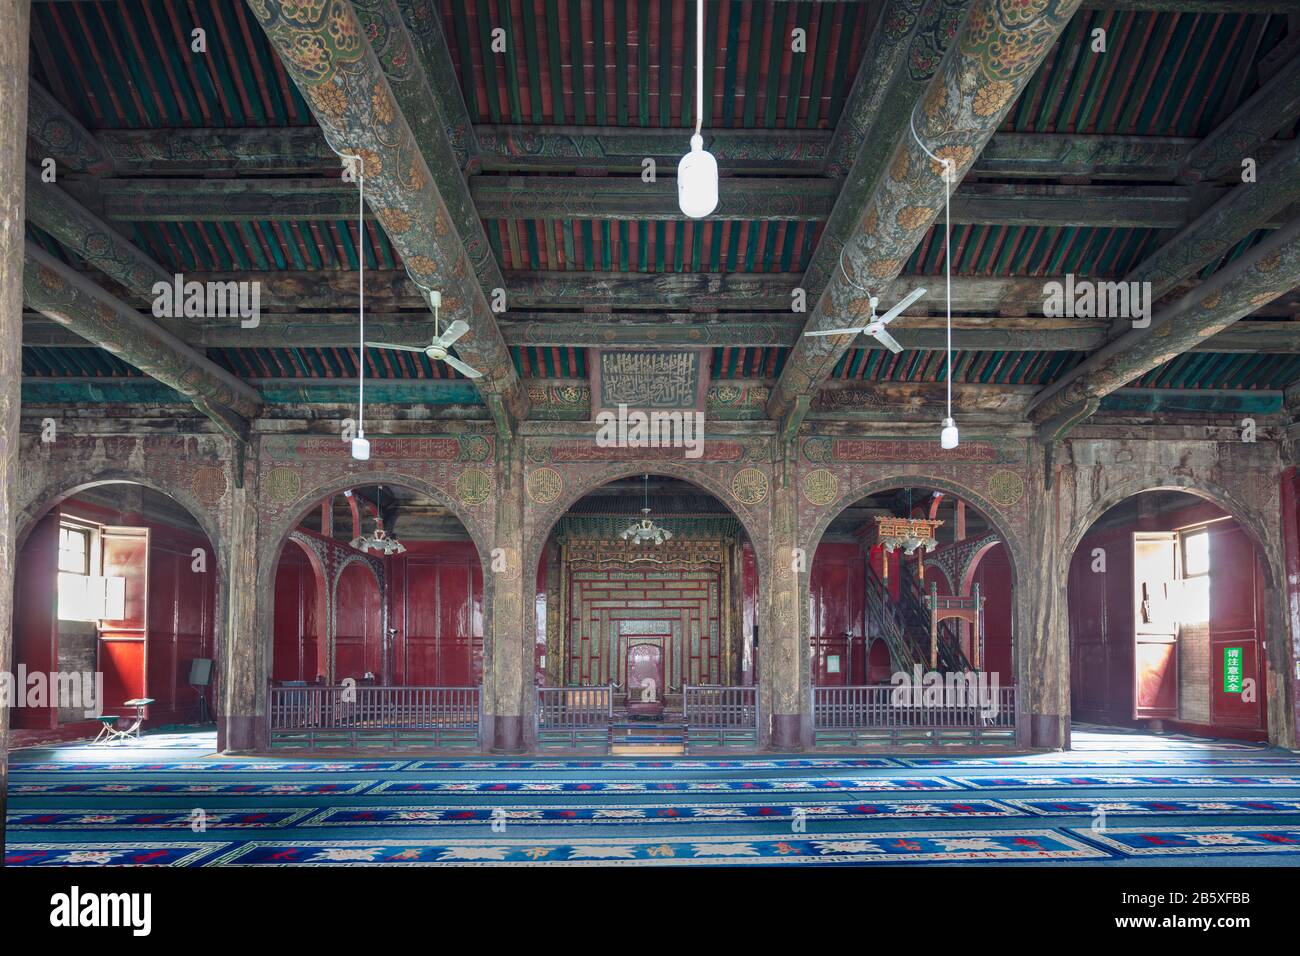 interior view of mihrab, Taiyuan Ancient Great Mosque, Xinghualing District, Taiyuan City, Shanxi Province, China Stock Photo